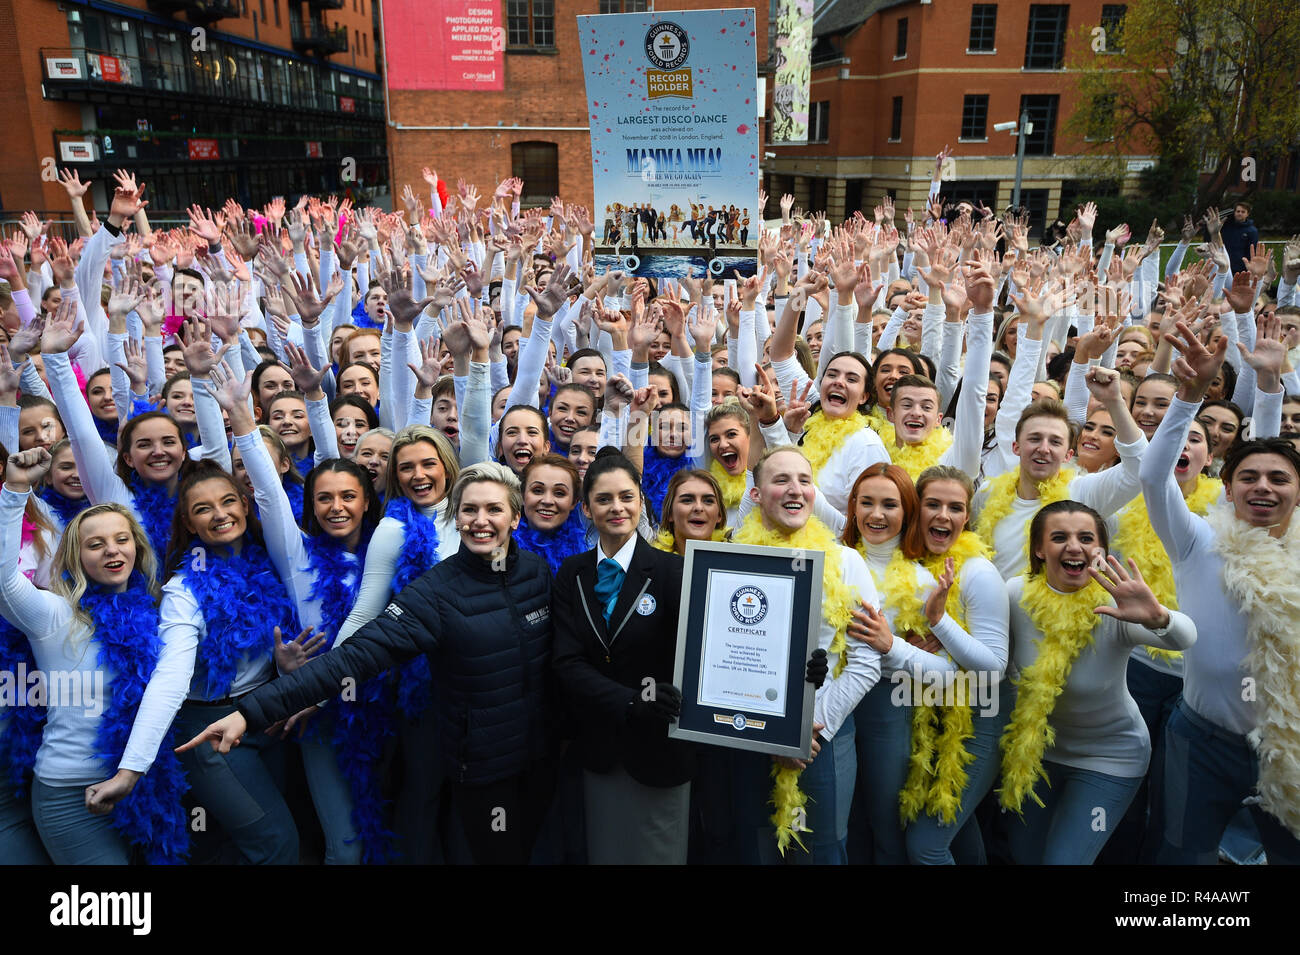 A Guiness World Record's adjudicator, Joanne Brent (centre), presents the certificate for the Guinness World record for 'the world's largest disco dance' in Waterloo, London. Stock Photo